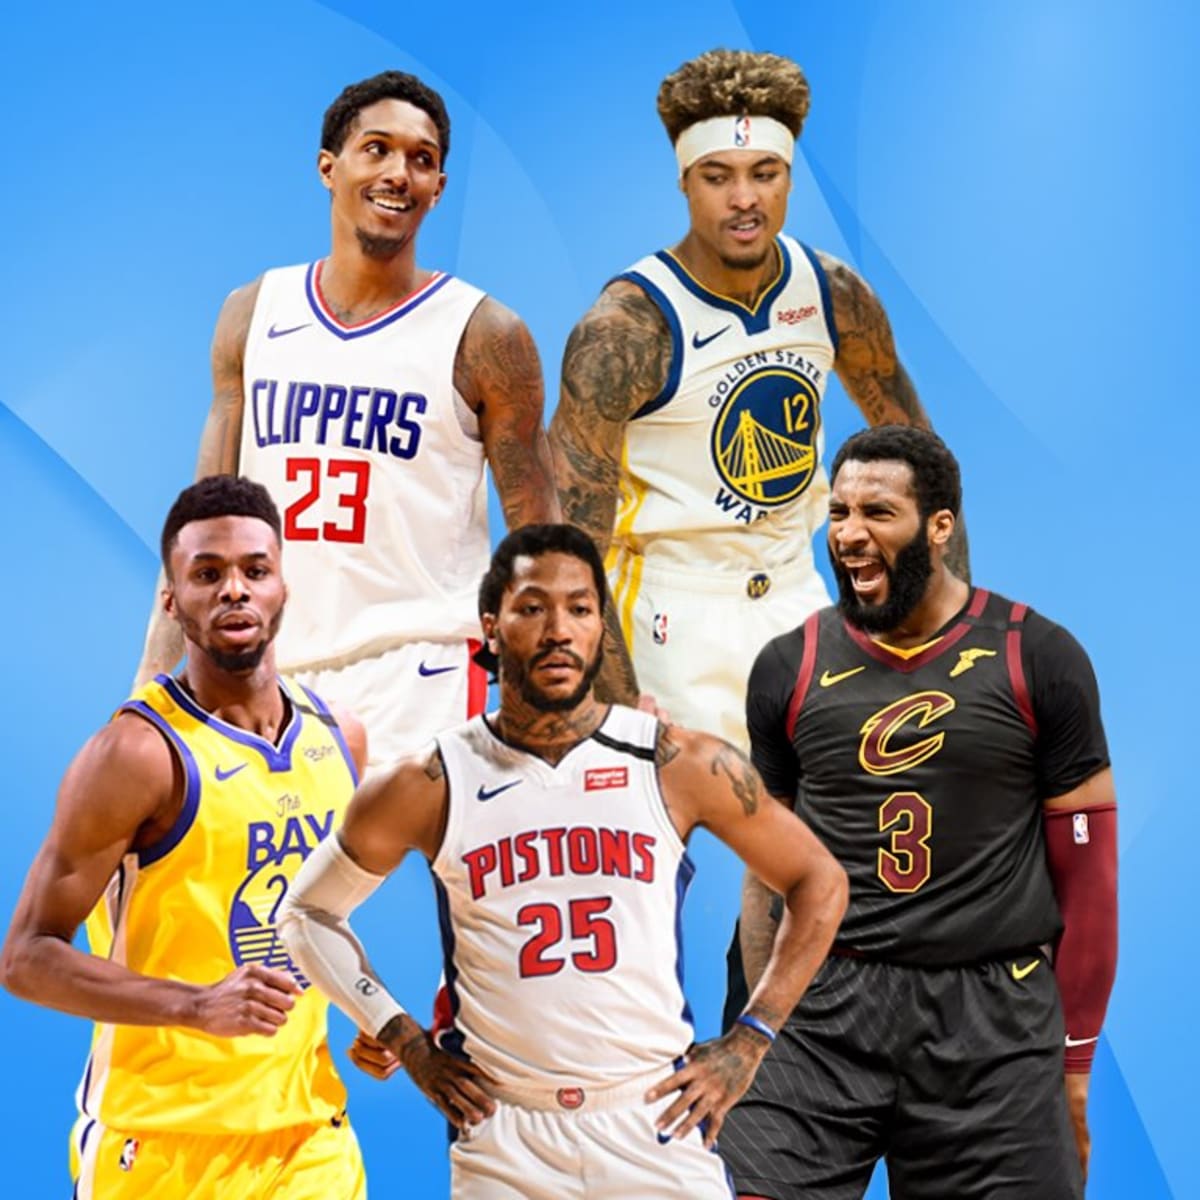 Top 100 NBA Players Continued! ⬇️Do You Agree with my List so Far?⬇️